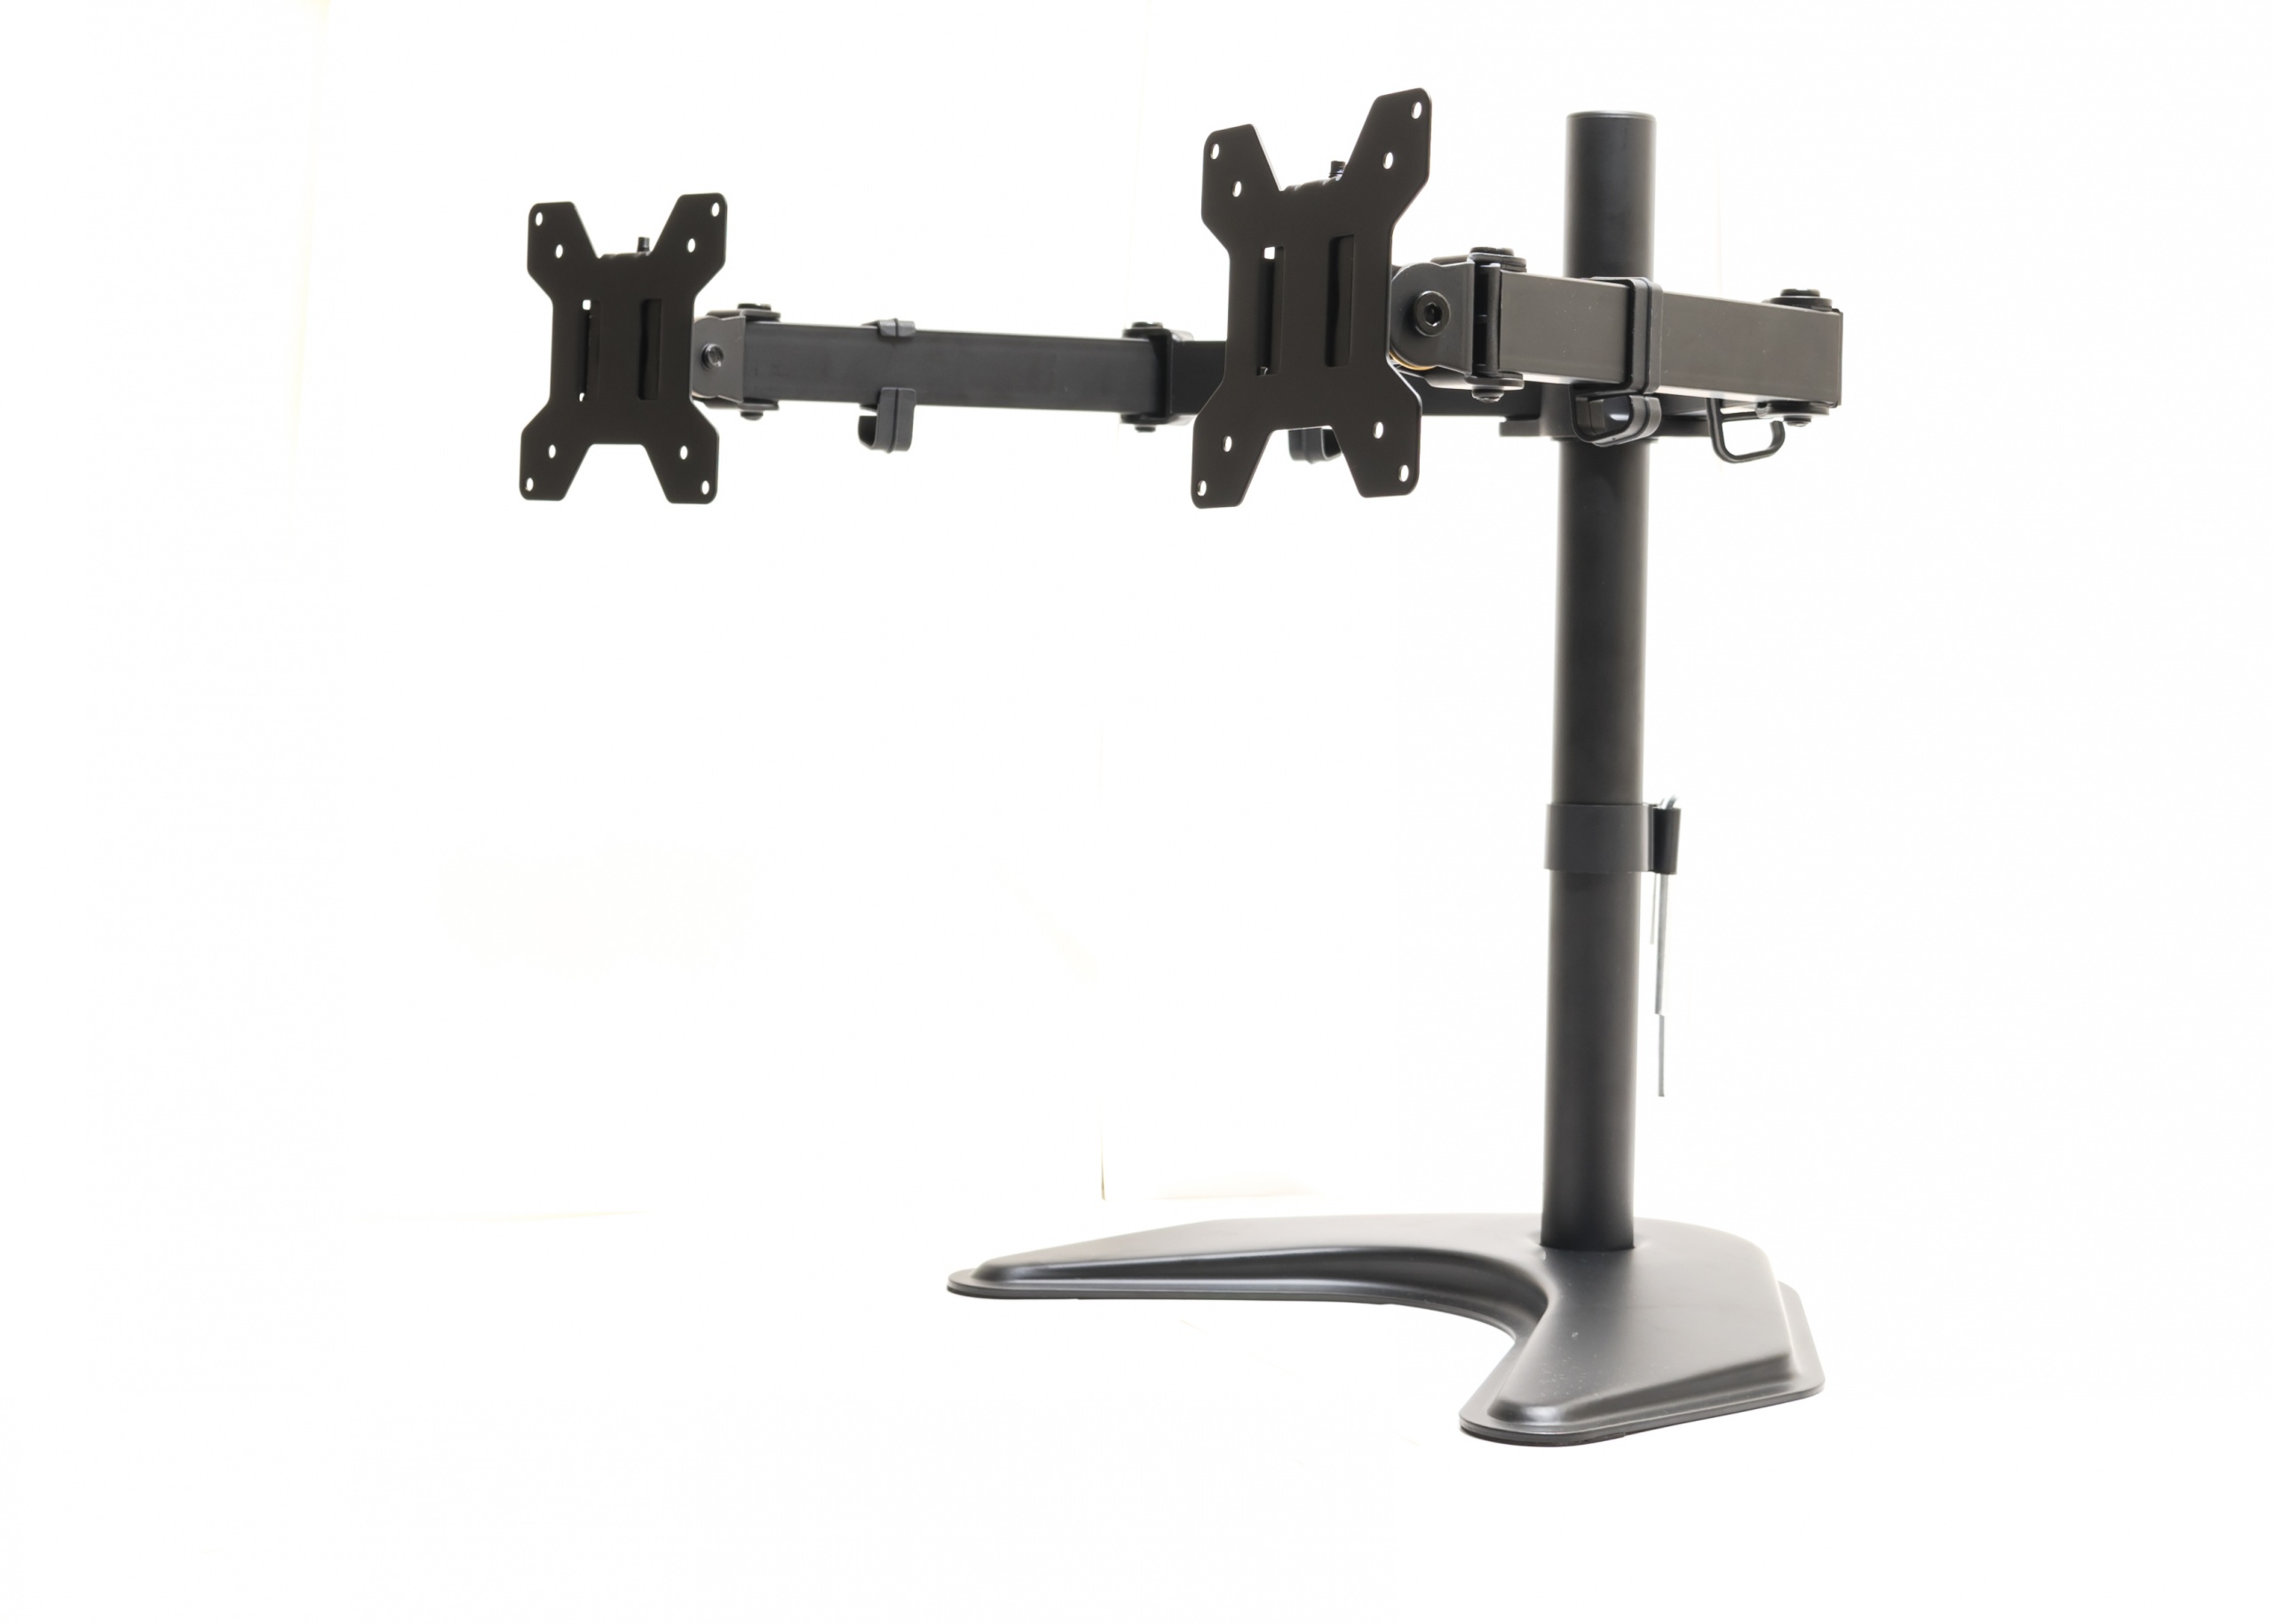 Desktop monitor mount in Singapore homes – 3 considerations to know before installation